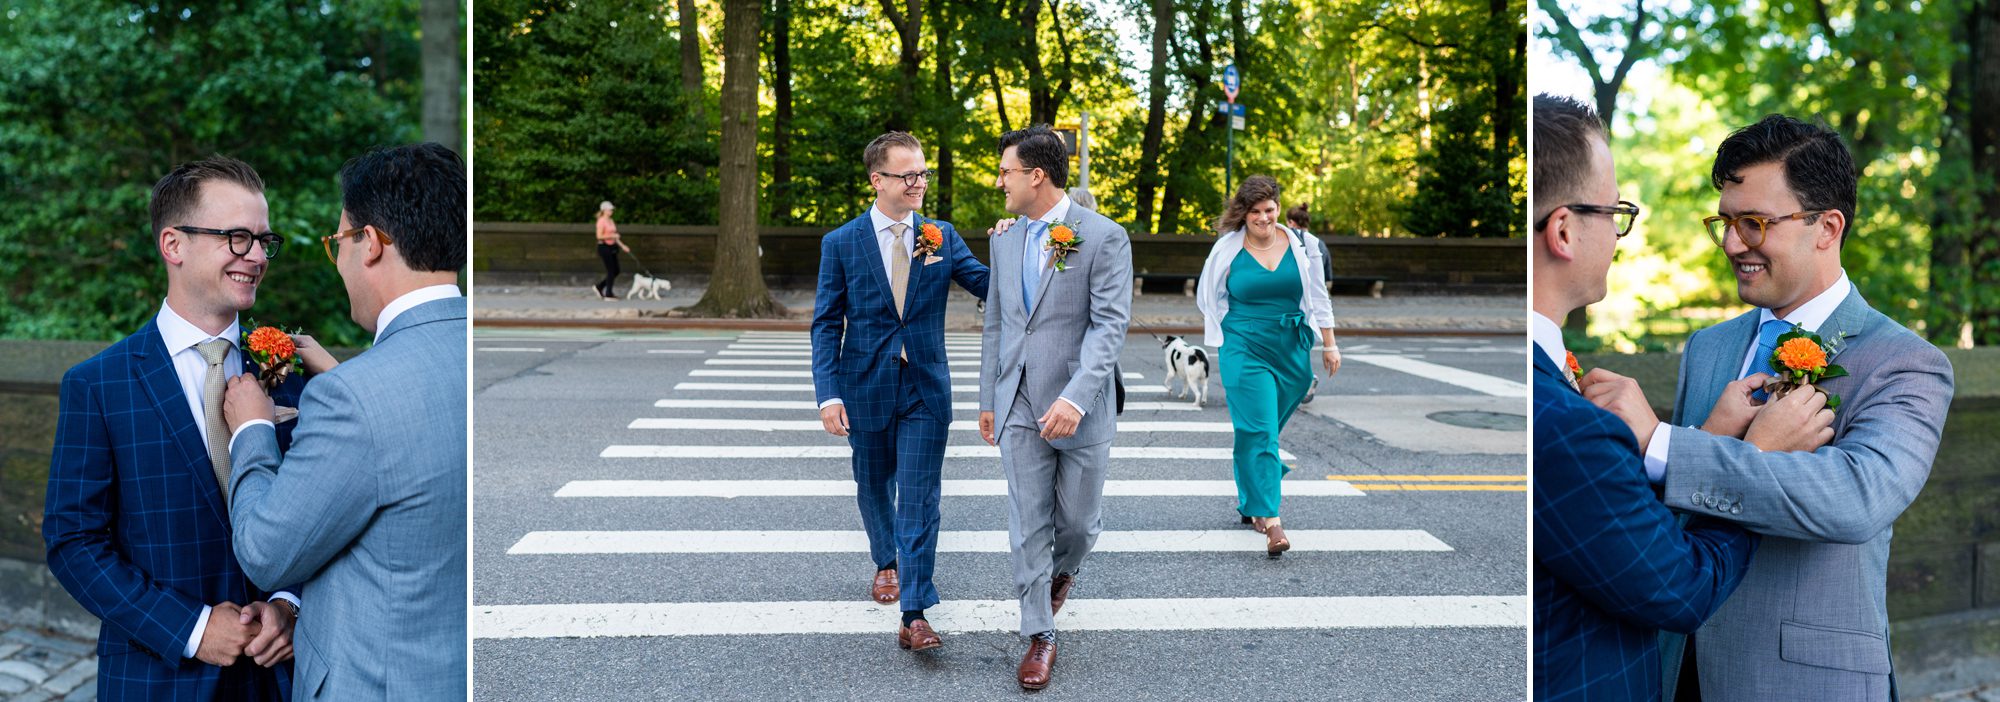 Central Park Wedding with Two Grooms